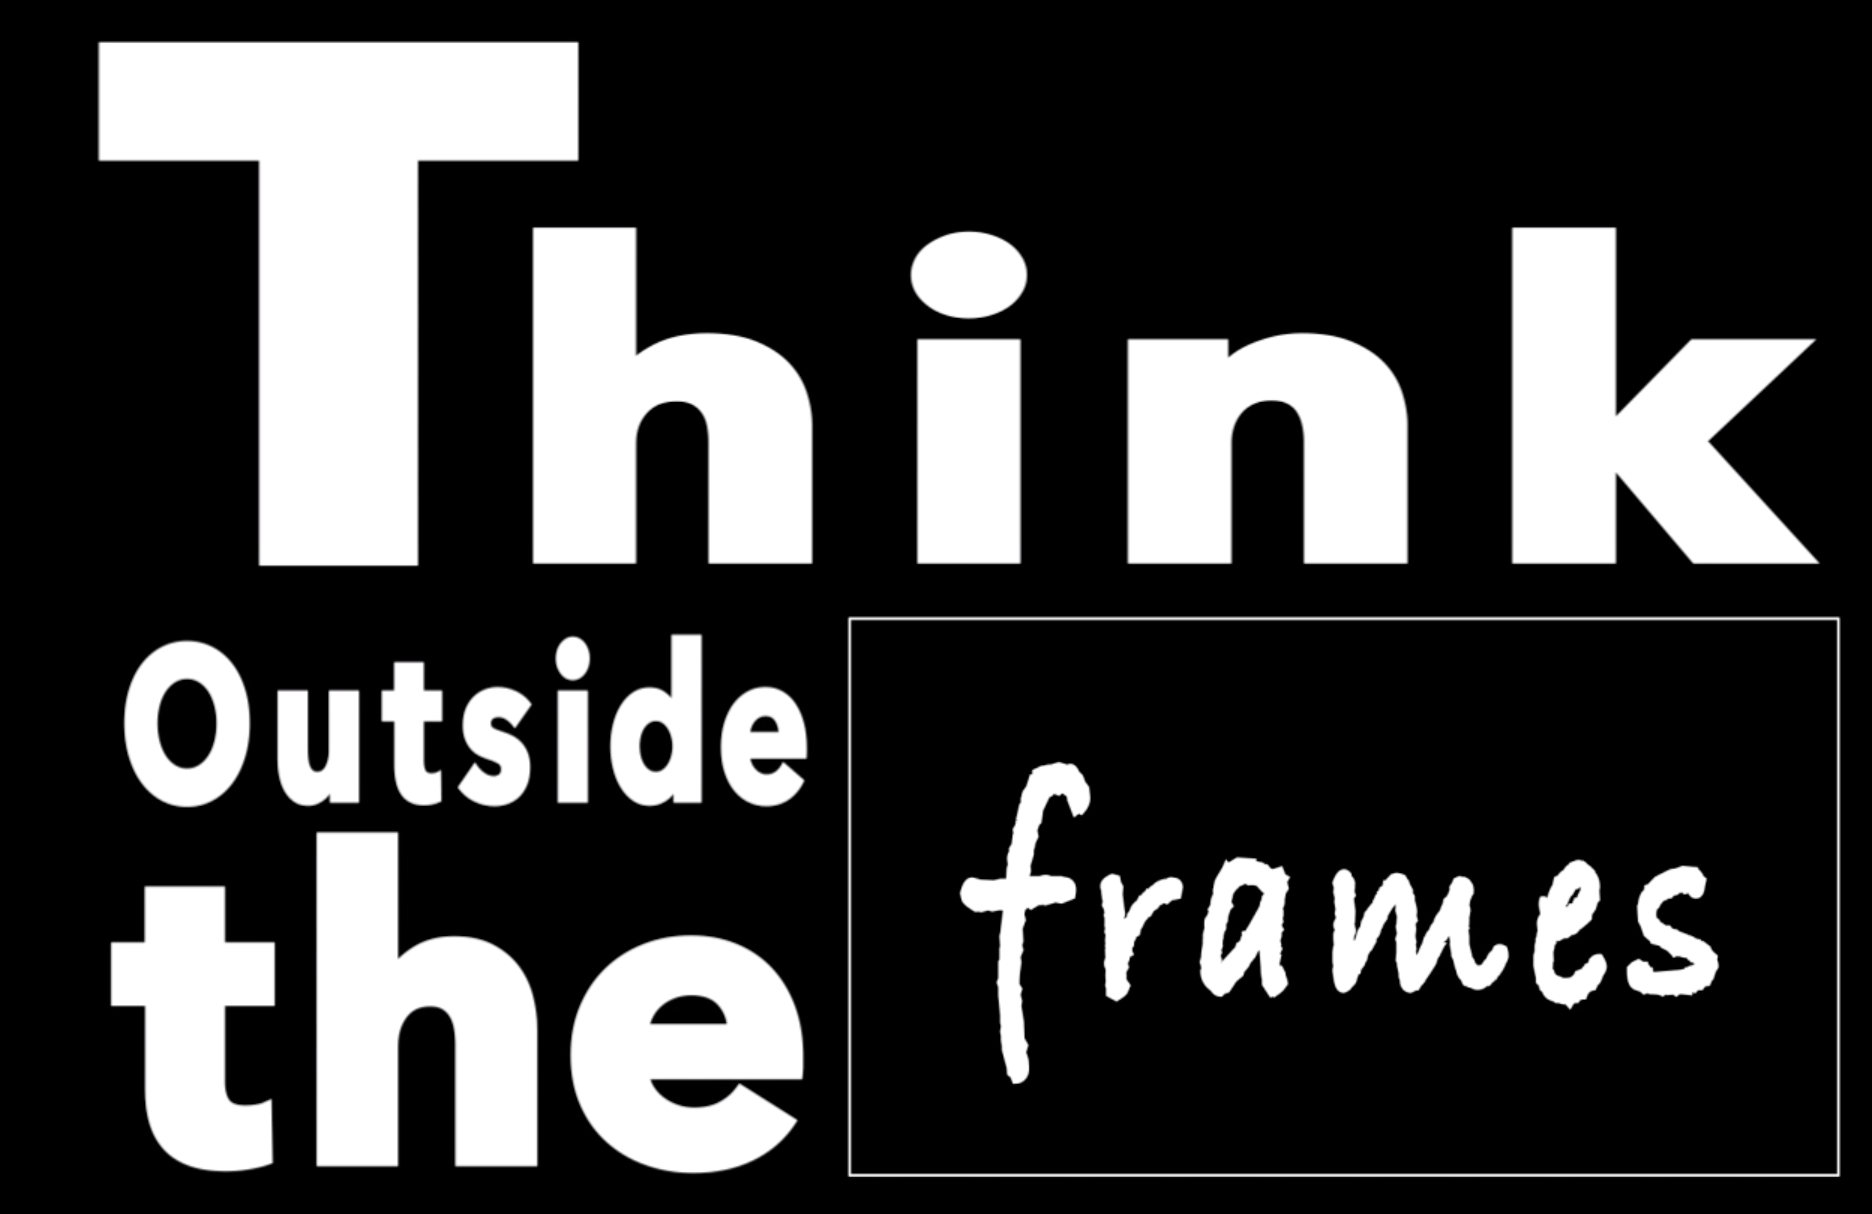 Think Outside the “frames”